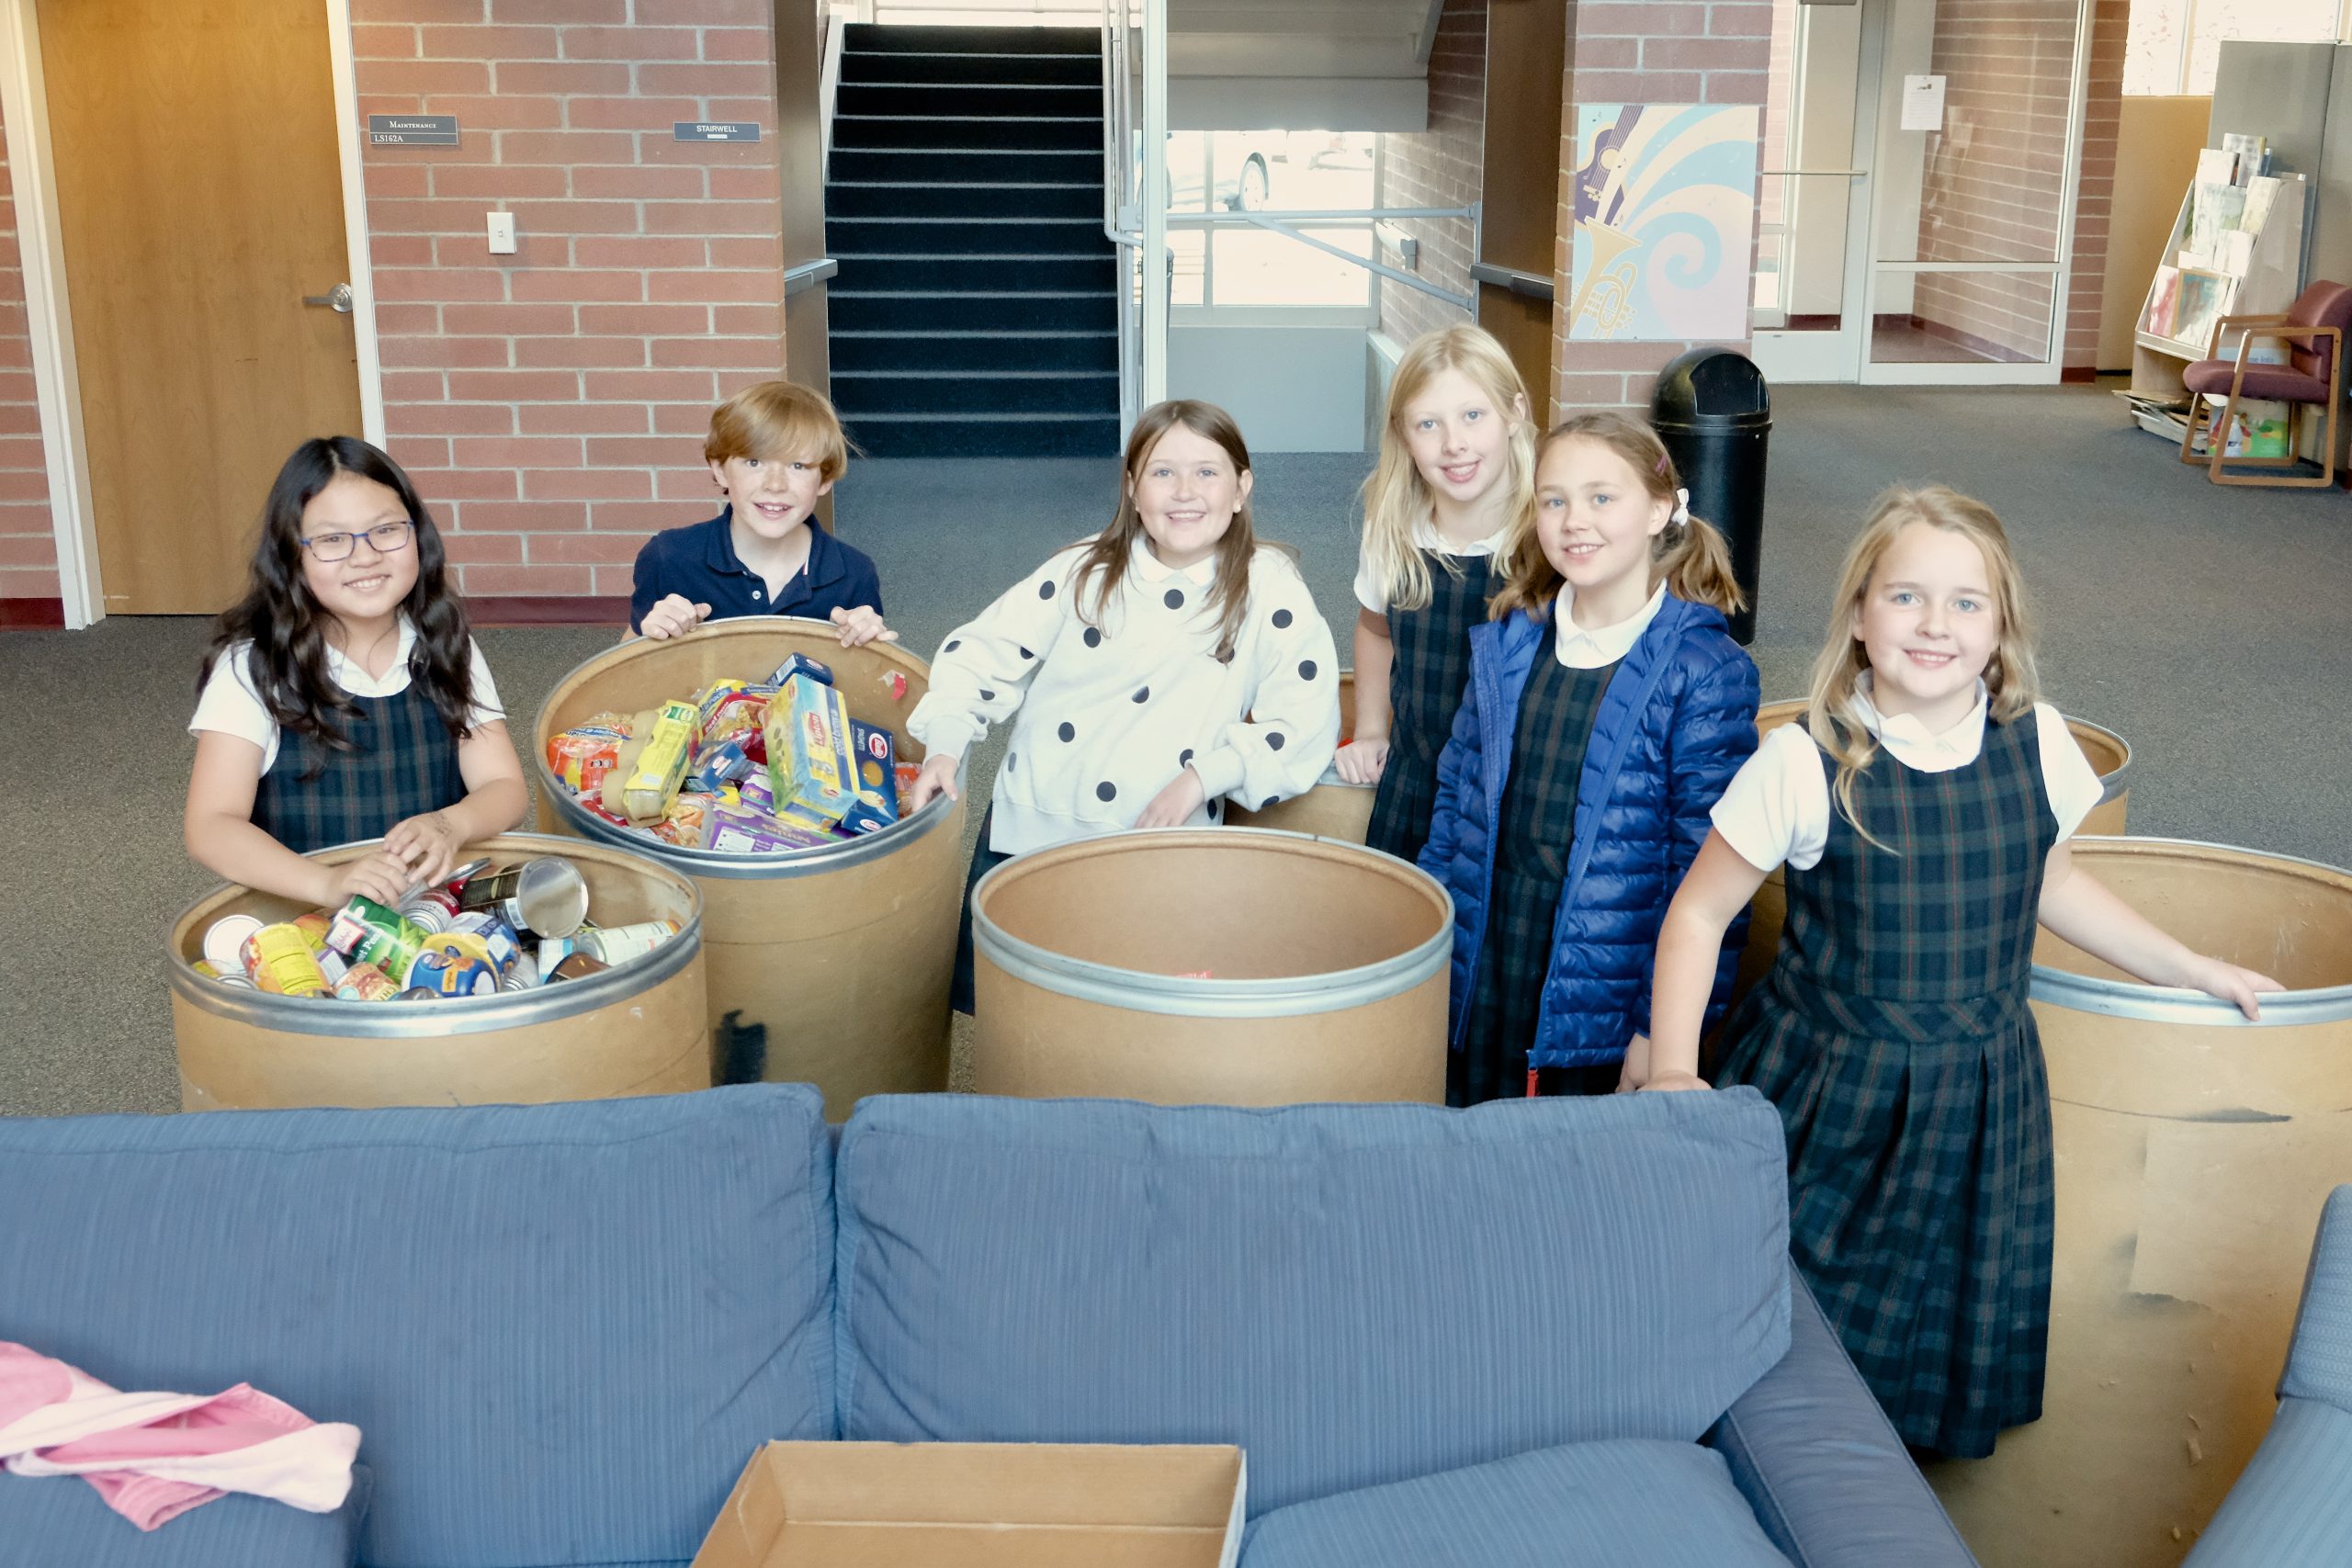 Lower School donations for the Utah Food Bank